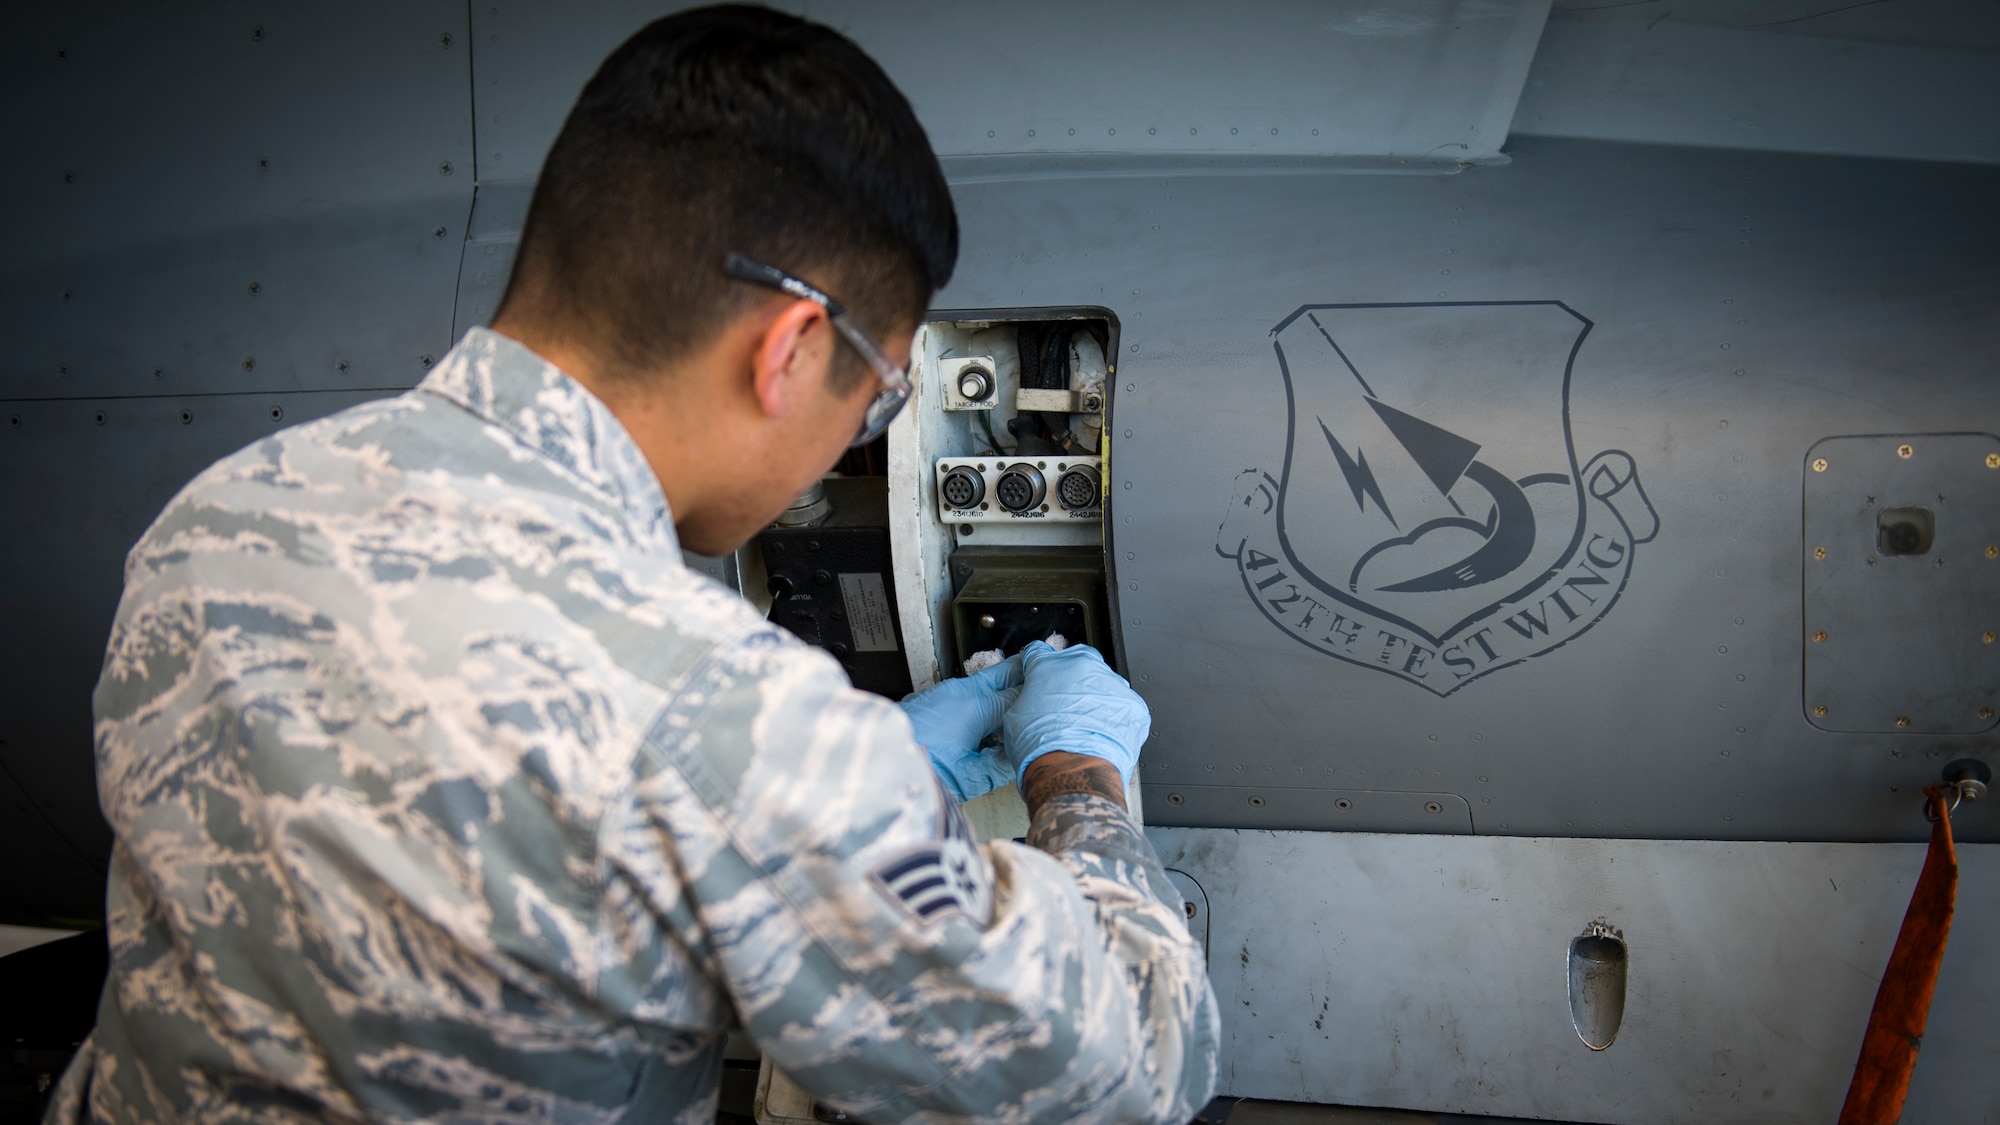 Senior Airman Nathan Nauta, electrical and environmental technician assigned to the 926th Maintenance Support Squadron, Nellis Air Force Base, Nevada, conducts maintenance services on a communications terminal on an F-16 Fighting Falcon at Edwards Air Force Base, California, July 24. (Air Force photo by Giancarlo Casem)